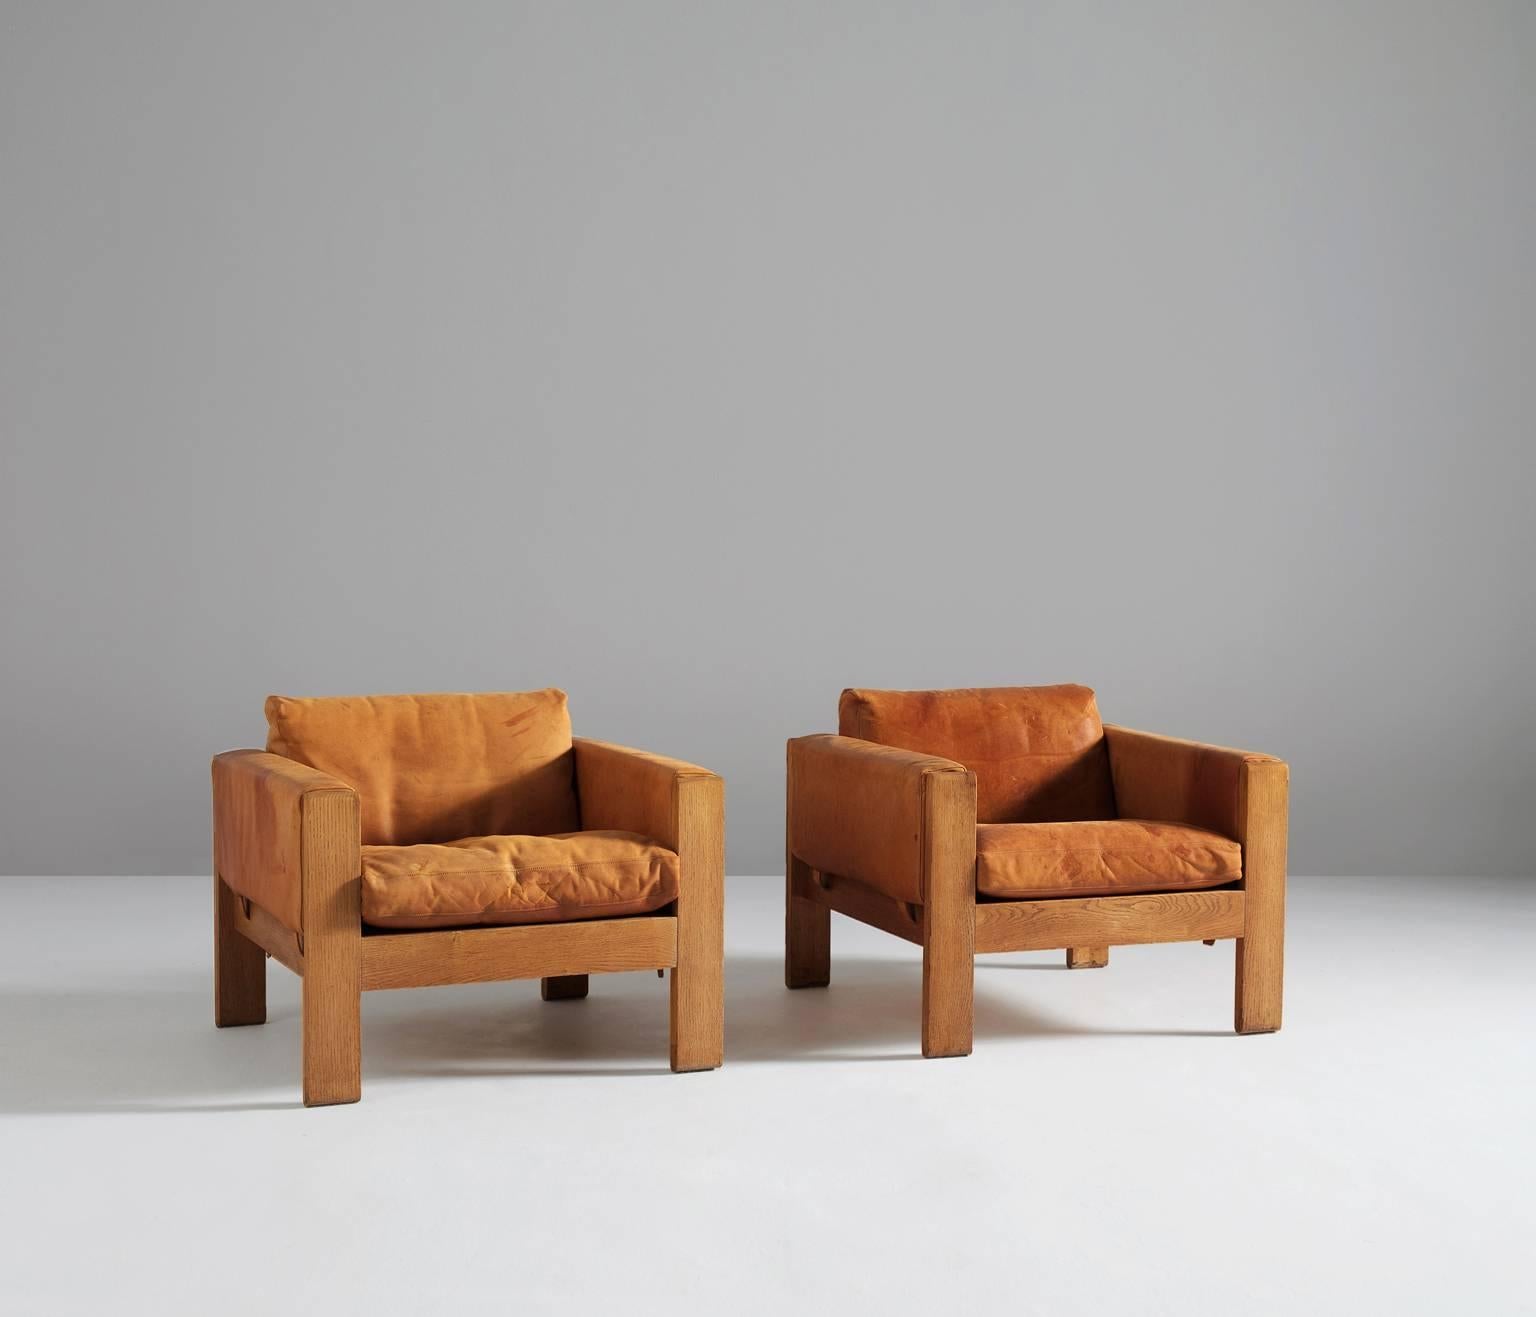 Pair of lounge chairs in oak and cognac leather, Denmark, 1960s.

A pair of comfortable cognac leather easy chairs. These lounge chairs holds a solid crafted oak frame in a nice cubic design. The seating and back are with dawn filled cushions. The